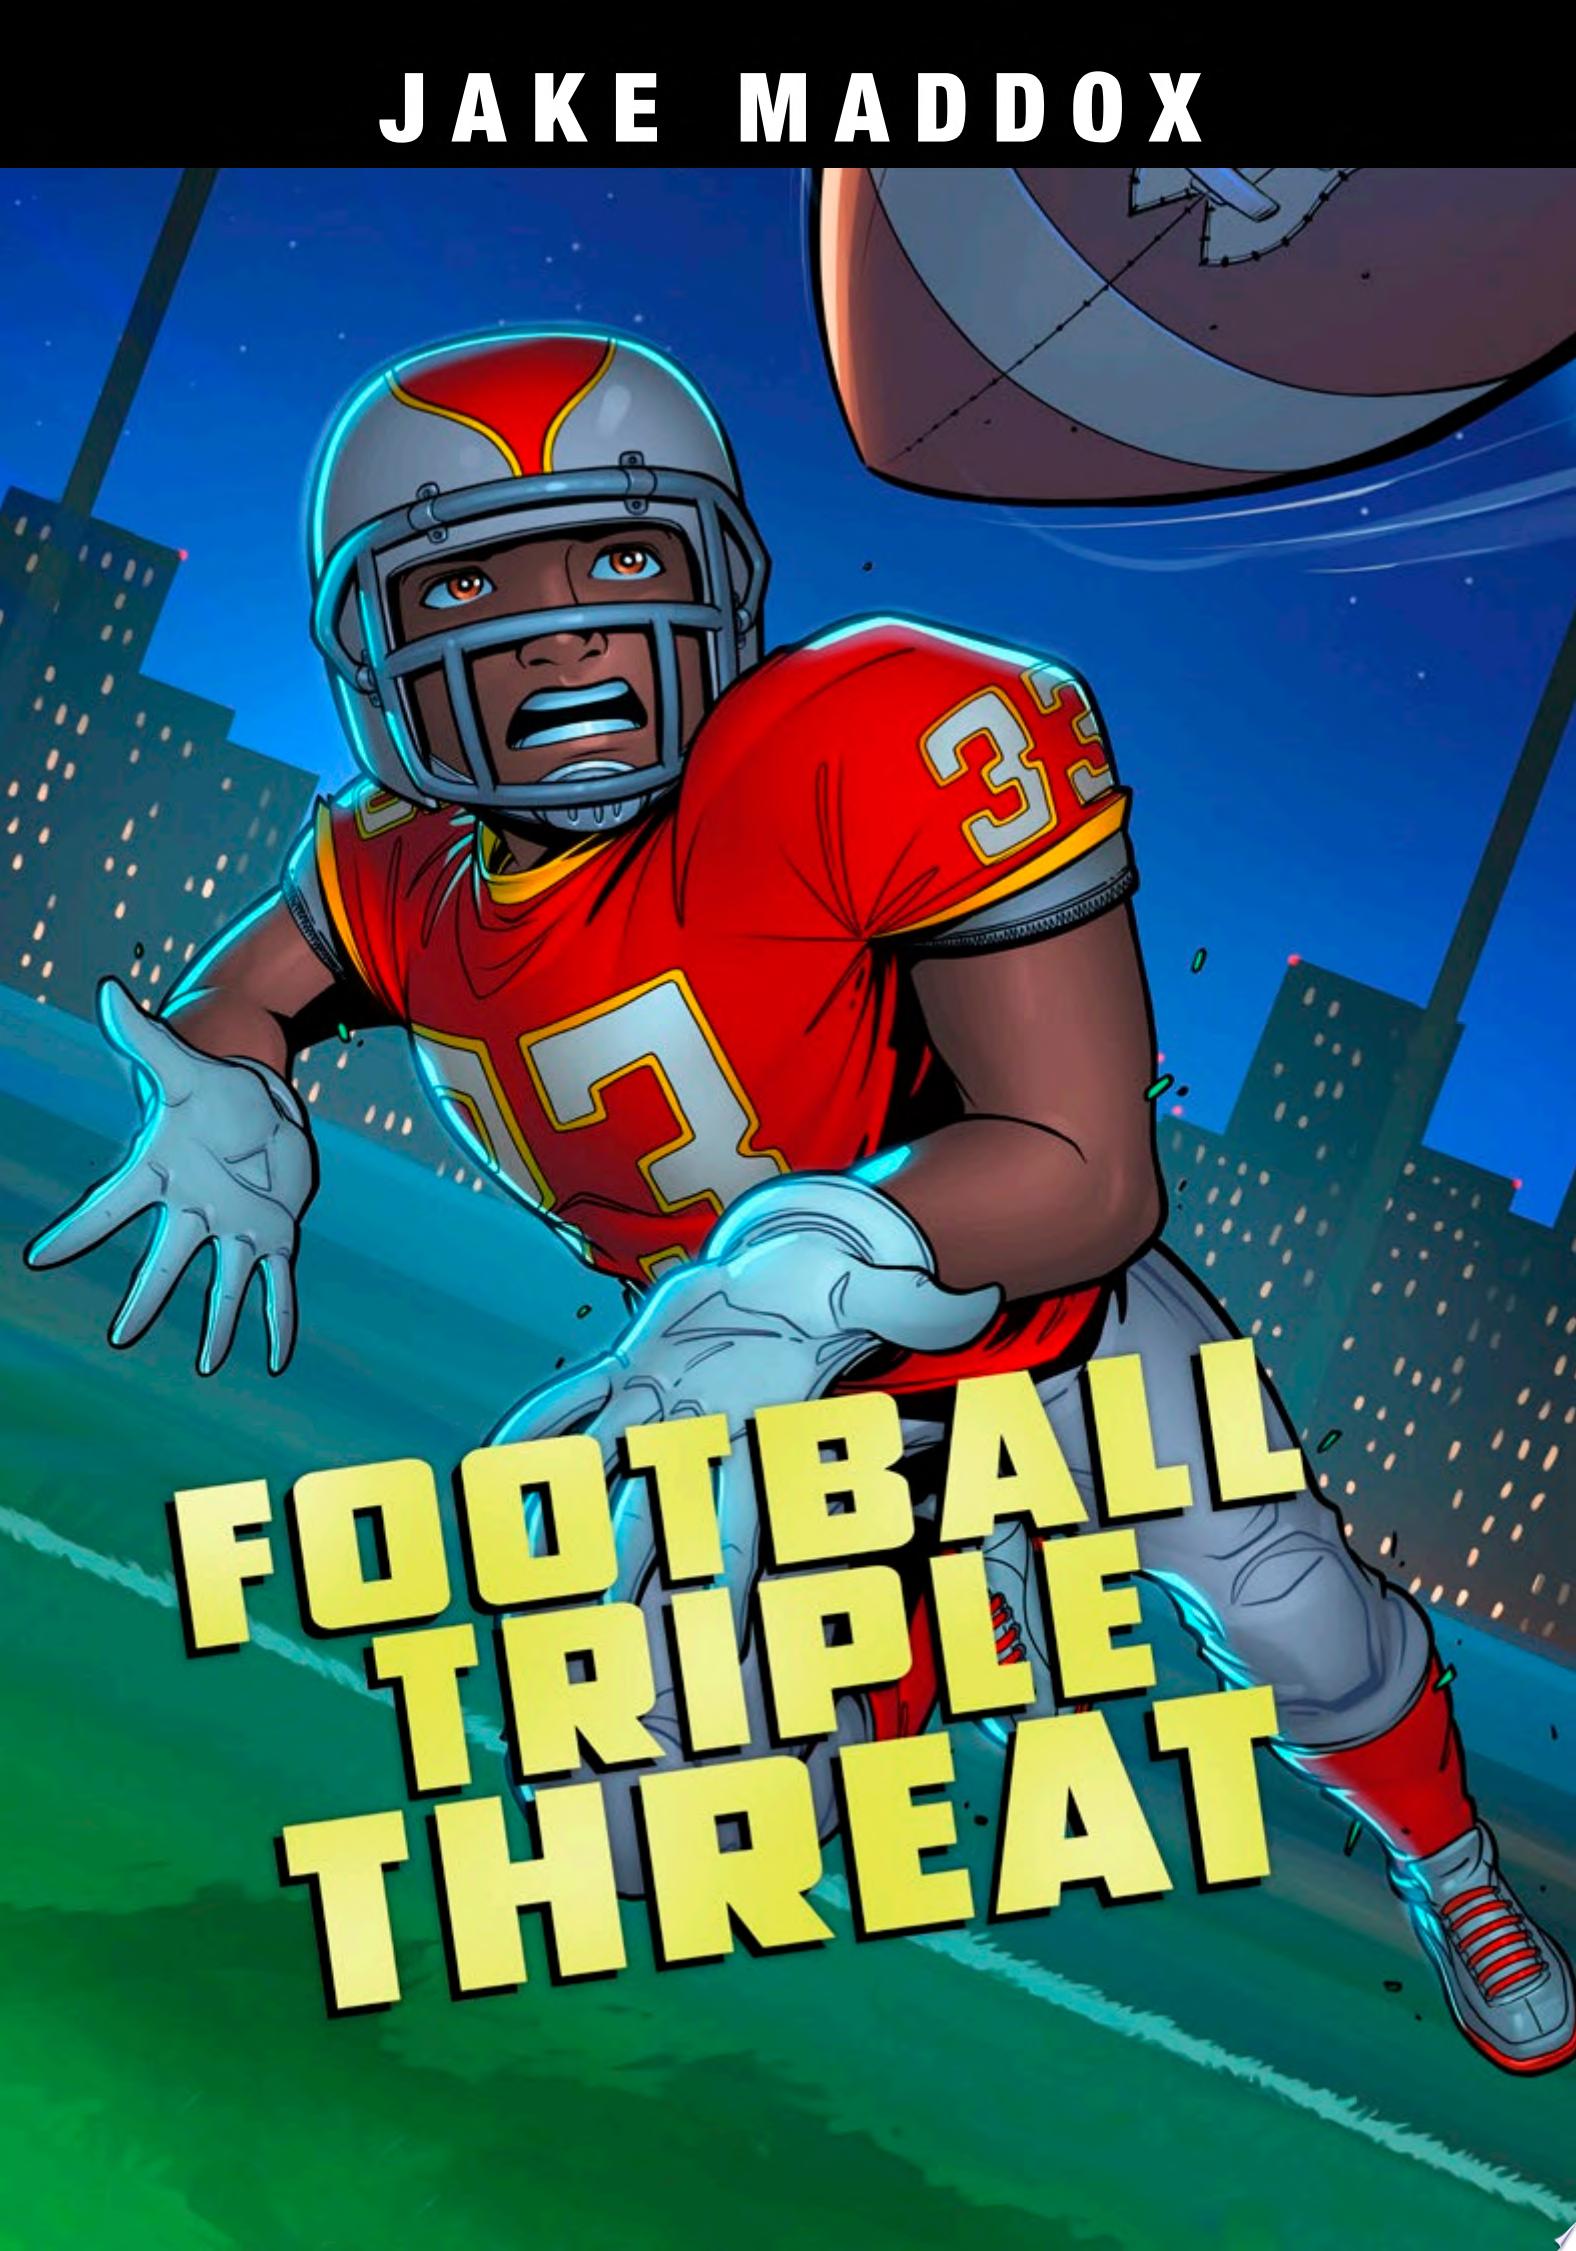 Image for "Football Triple Threat"